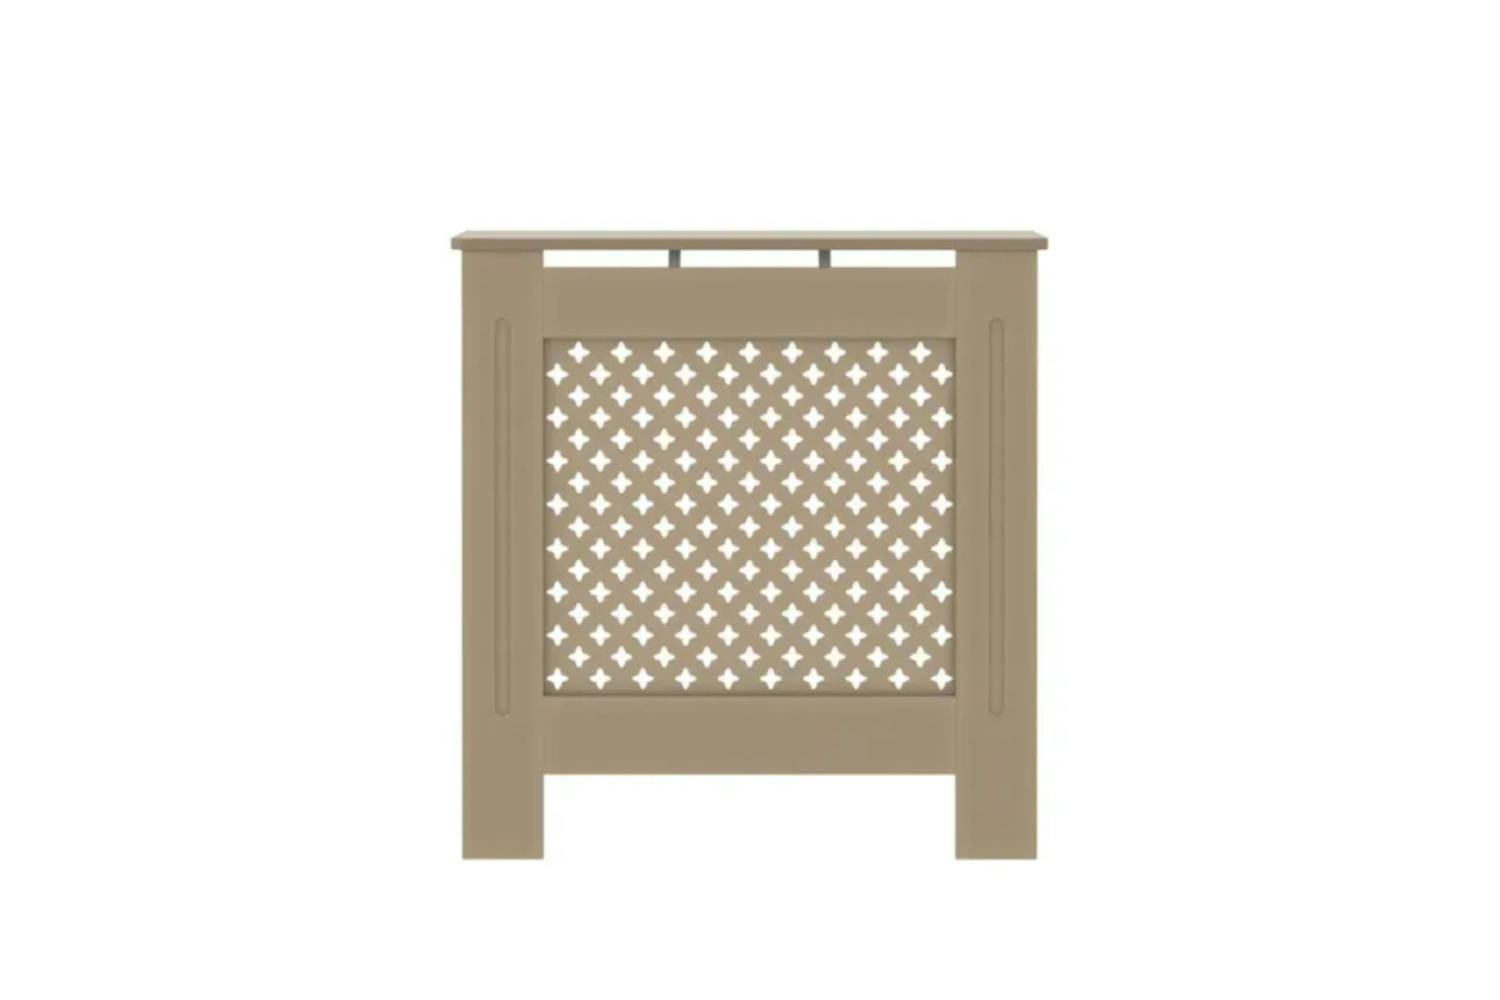 AKH RCSCCN Criss Cross Ardmore Radiator Cover | Small | Natural